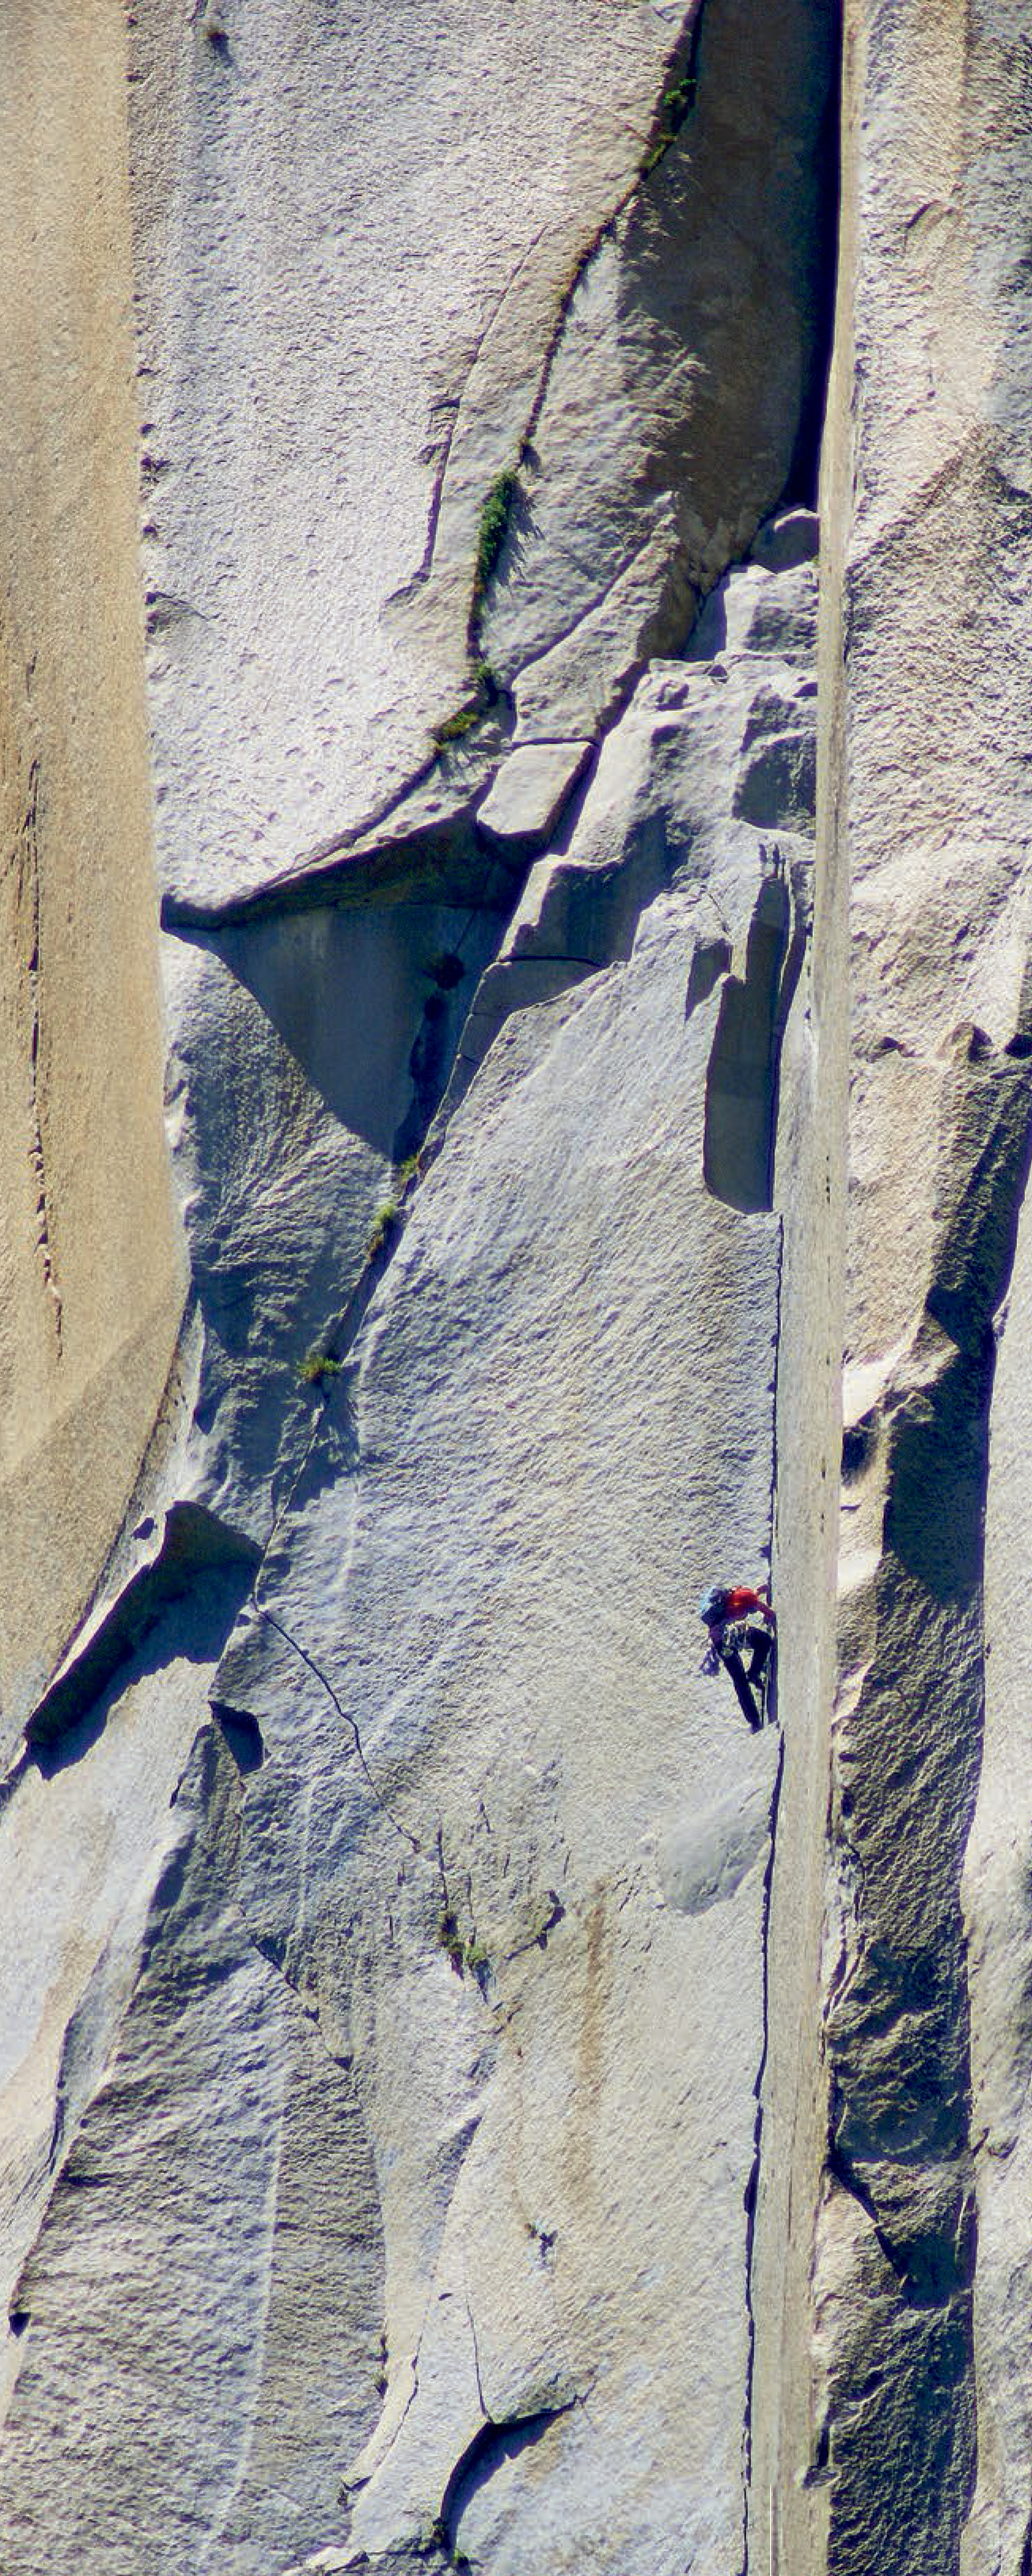 Honnold on The Nose. Both climbers and mainstream journalists were speculating whether Honnold or Dean Potter would free solo El Capitan first. Potter told Outside, The magazines want a race, but this would go beyond athletic achievement. Soloing, he insists, is spiritual. Honnold completed a ropeless ascent of Freerider (5.13a, 3,000') on June 3, 2017. [Photo] Tom Evans